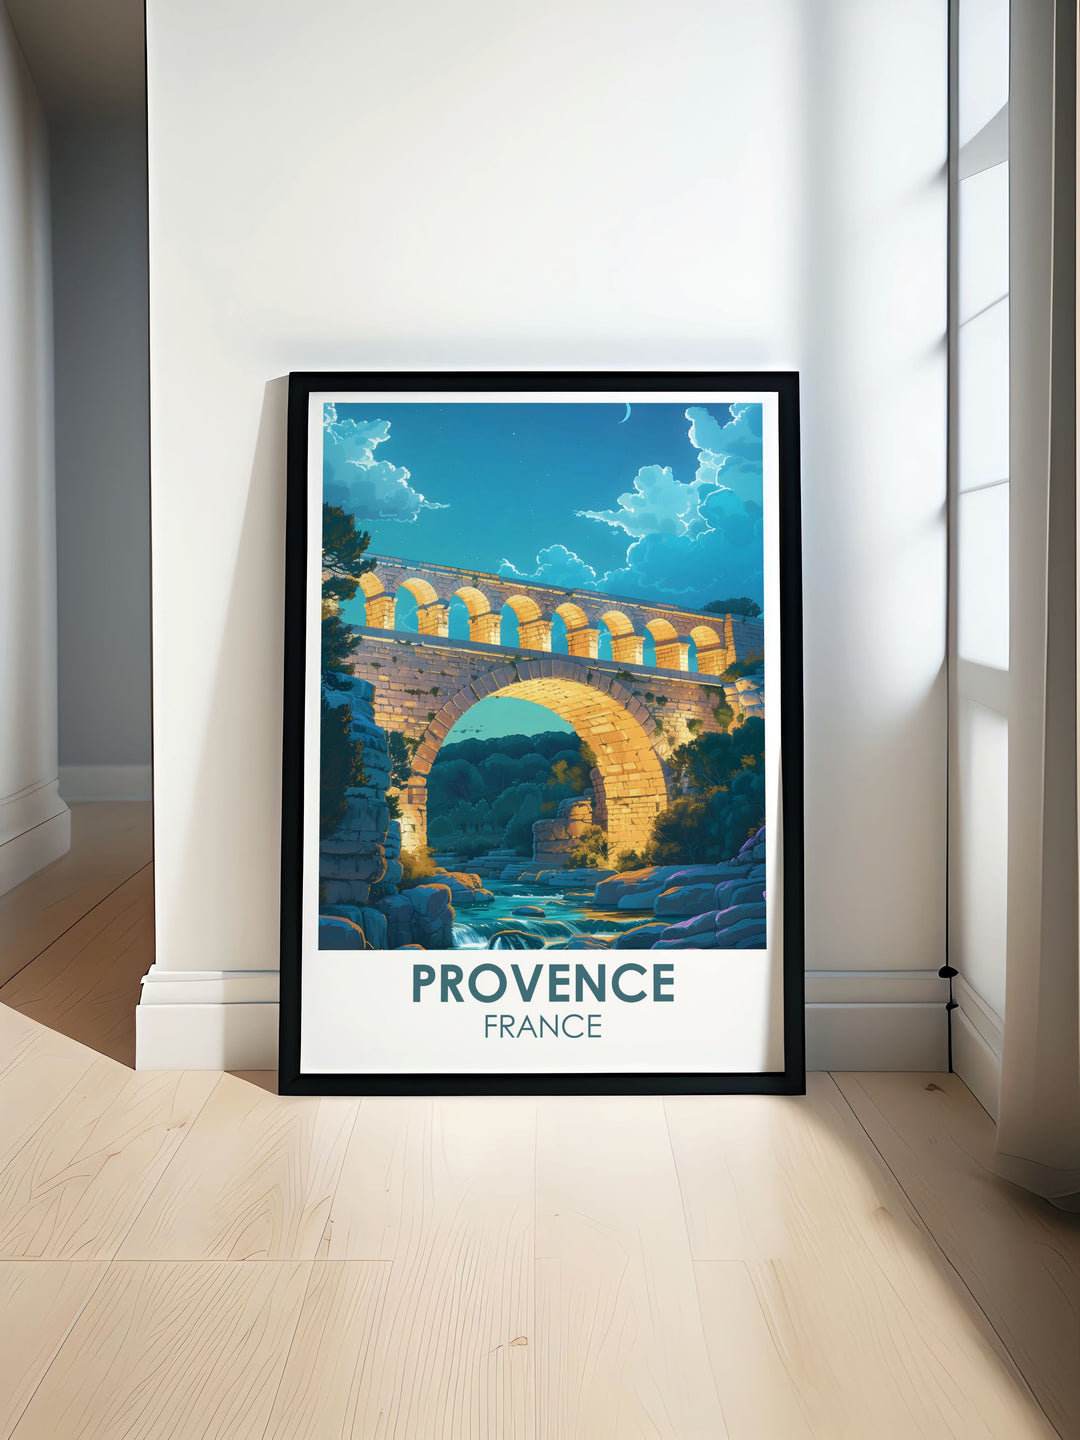 Delve into the rich history of Provence with this travel poster of the Pont du Gard, showcasing the ancient Roman aqueduct and its enduring legacy.